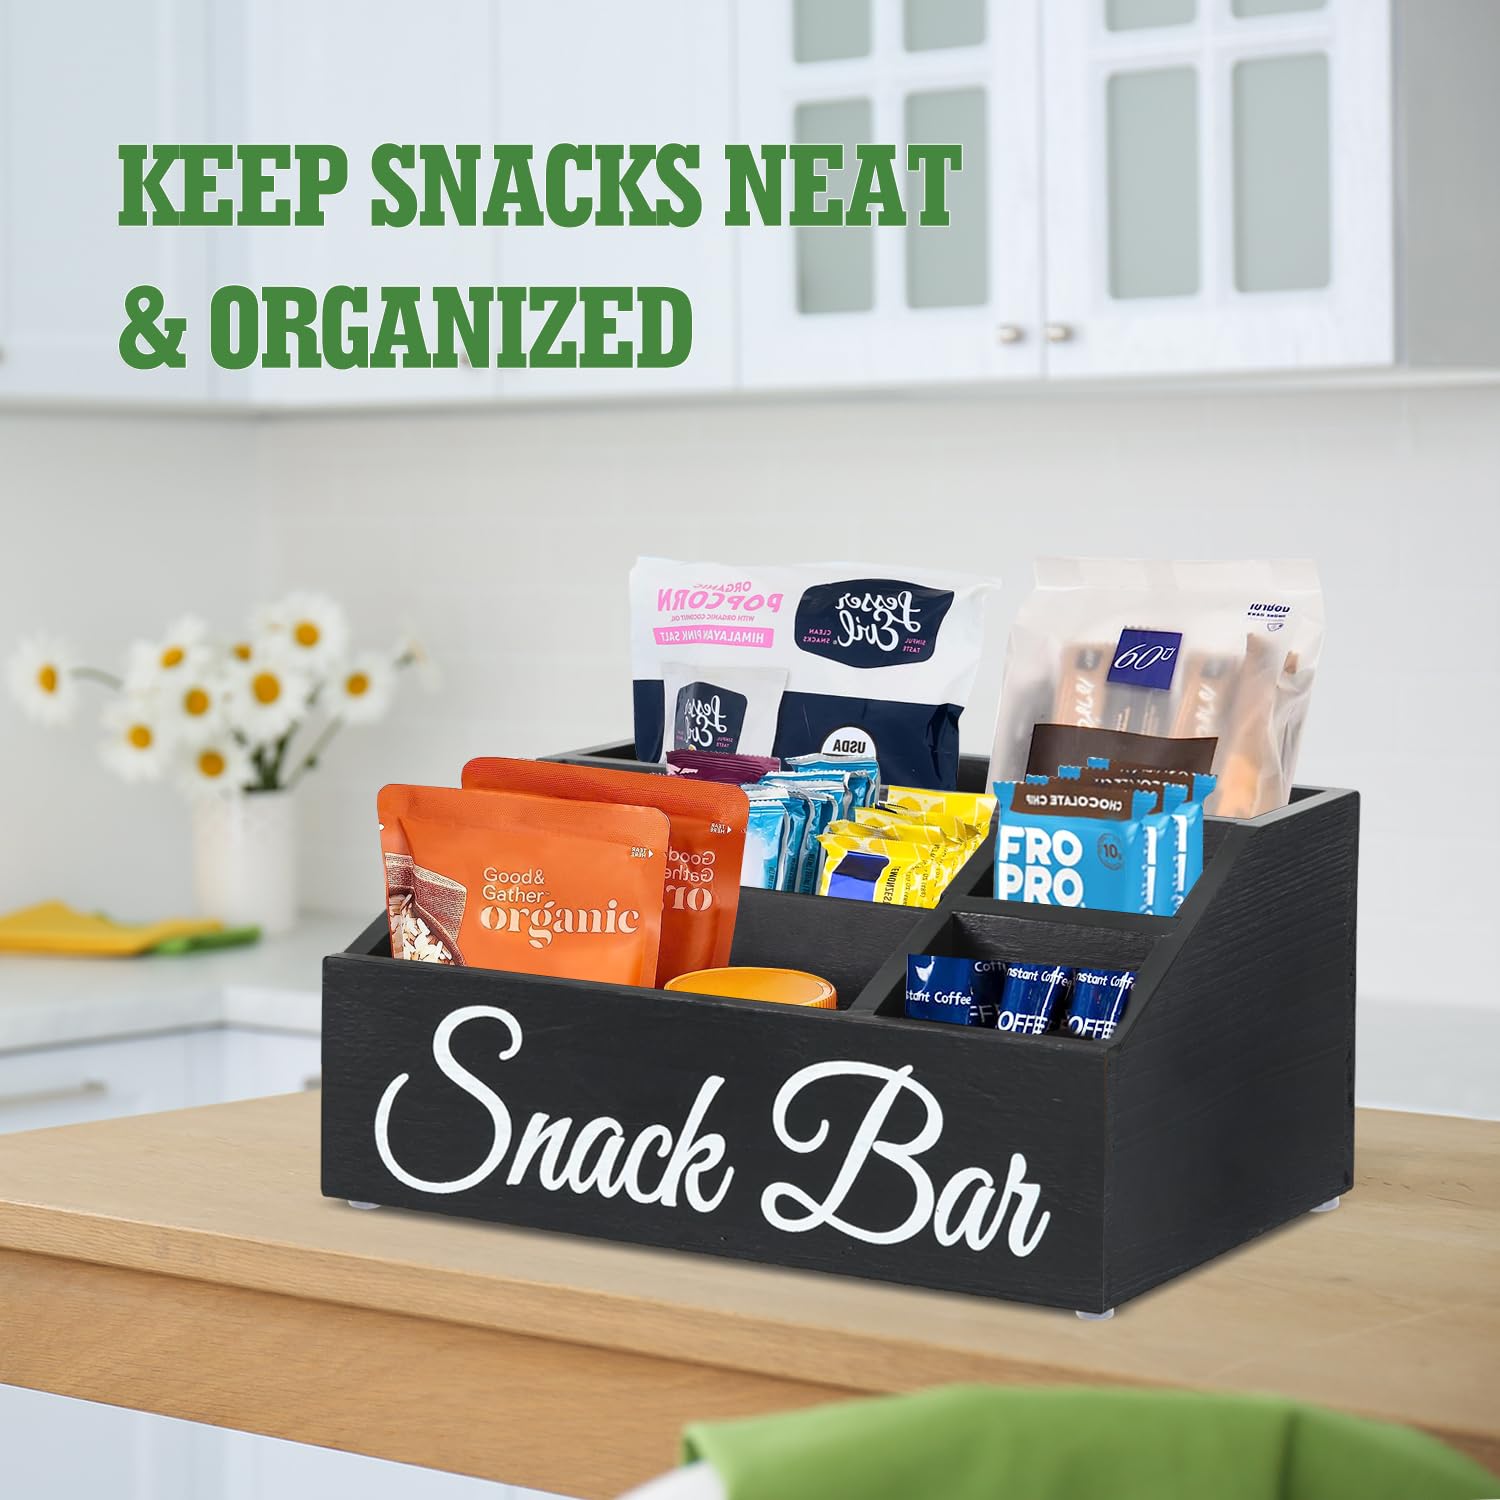 Snack Organizer for Countertop, Wooden Snack Tray and Food Storage Organizer Bins, Large 5-Compartment Snack Basket for Pantry, Kitchen Cabinet Pantry Organizer and Storage Bins for Snacks, Packets